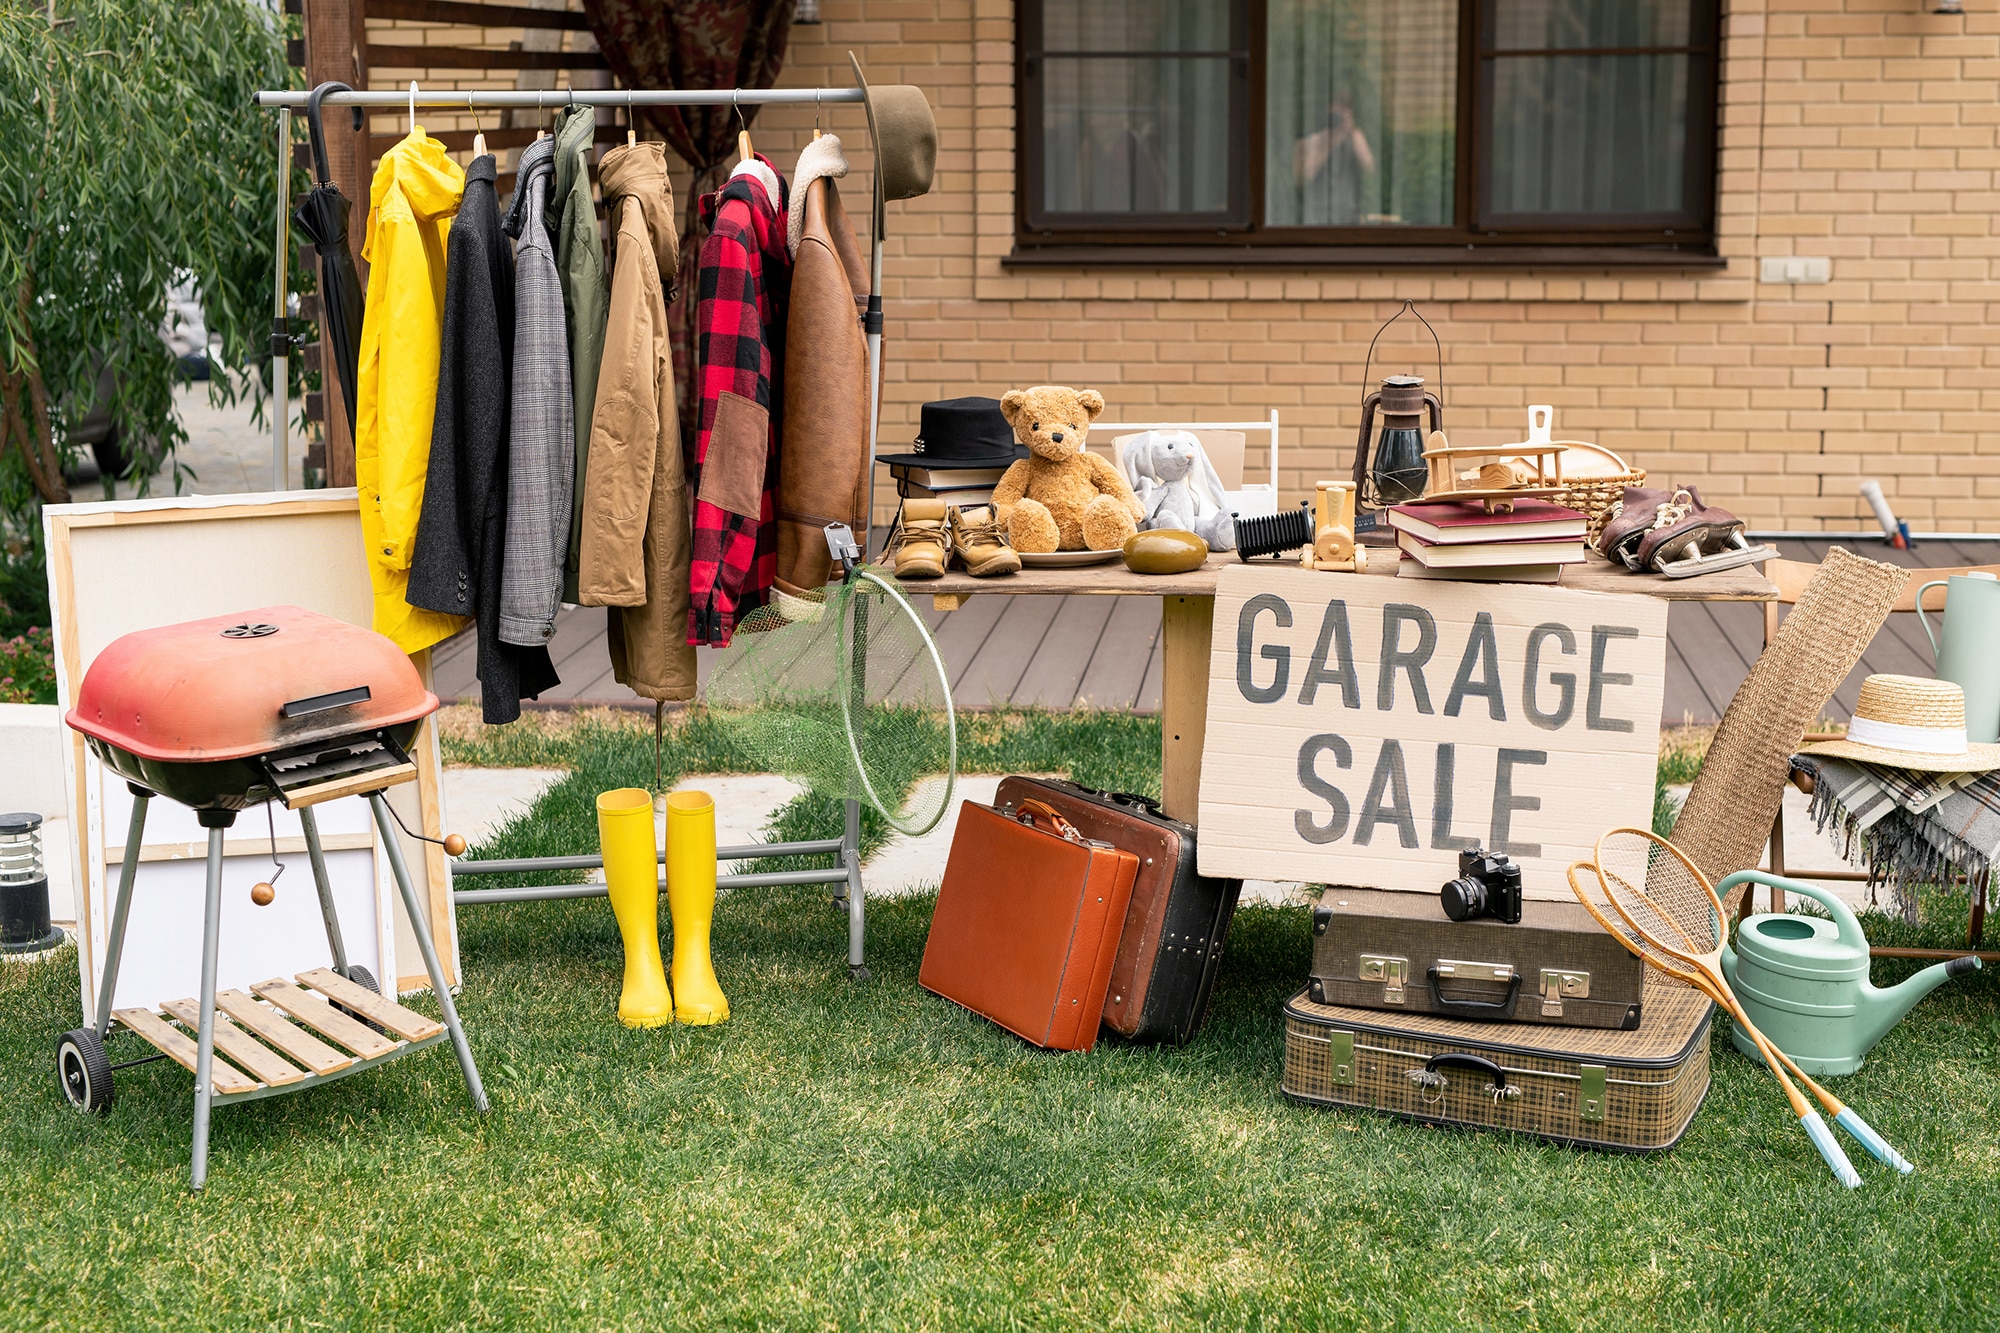 Picture showing items at a garage sale, including jackets, a grill, and a teddy bear.